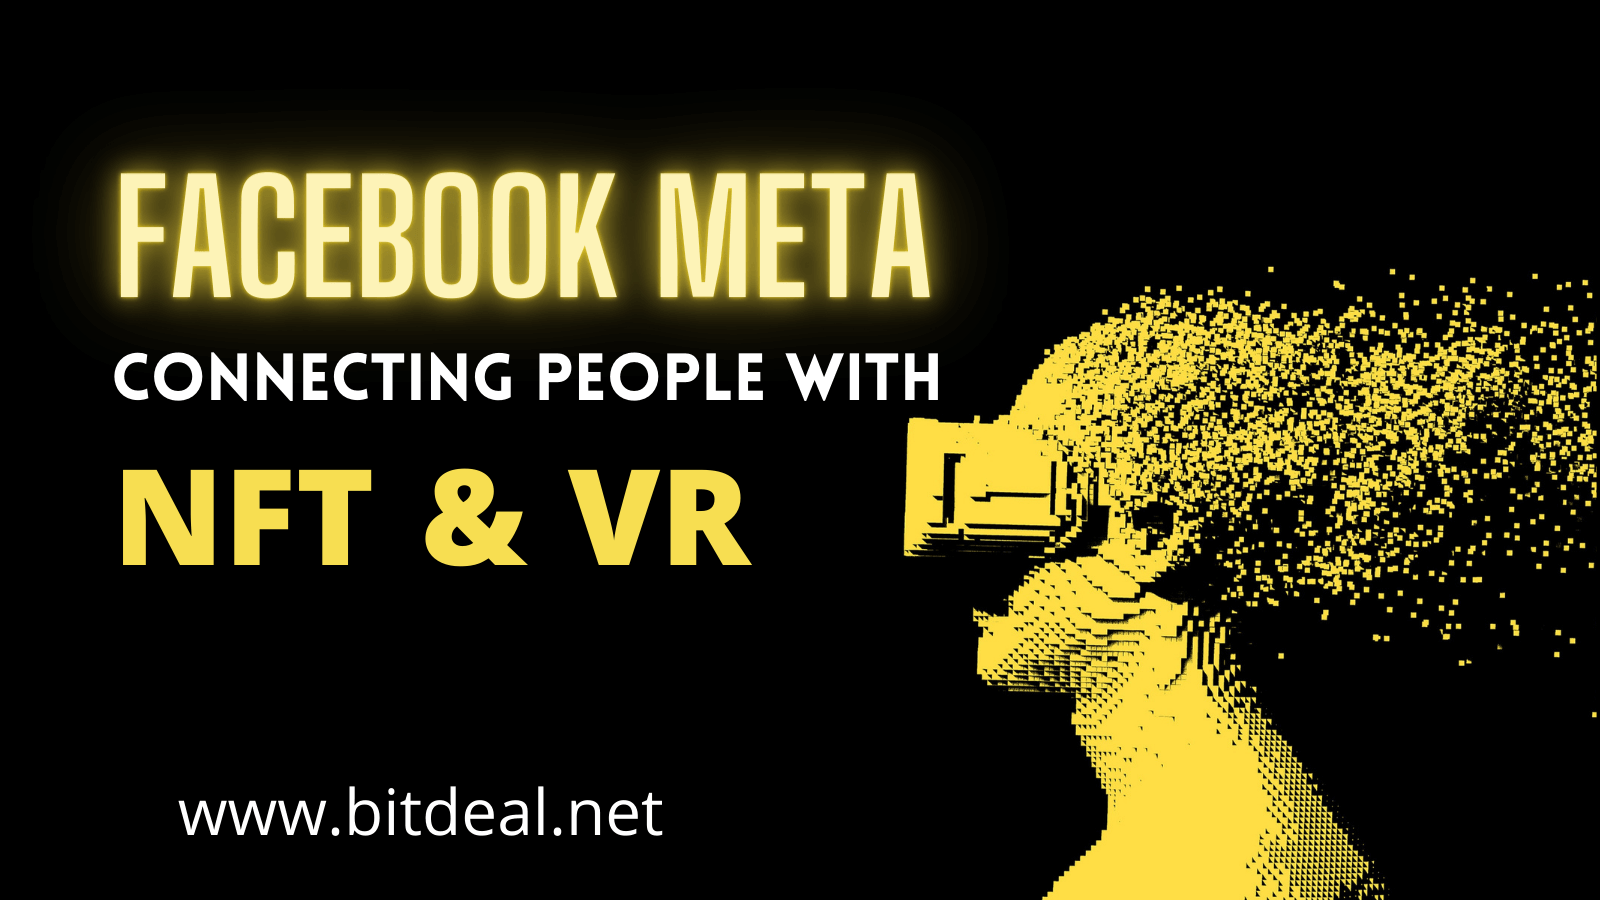 Facebook Rebranded as Meta: Is About To Support NFT Metaverse?